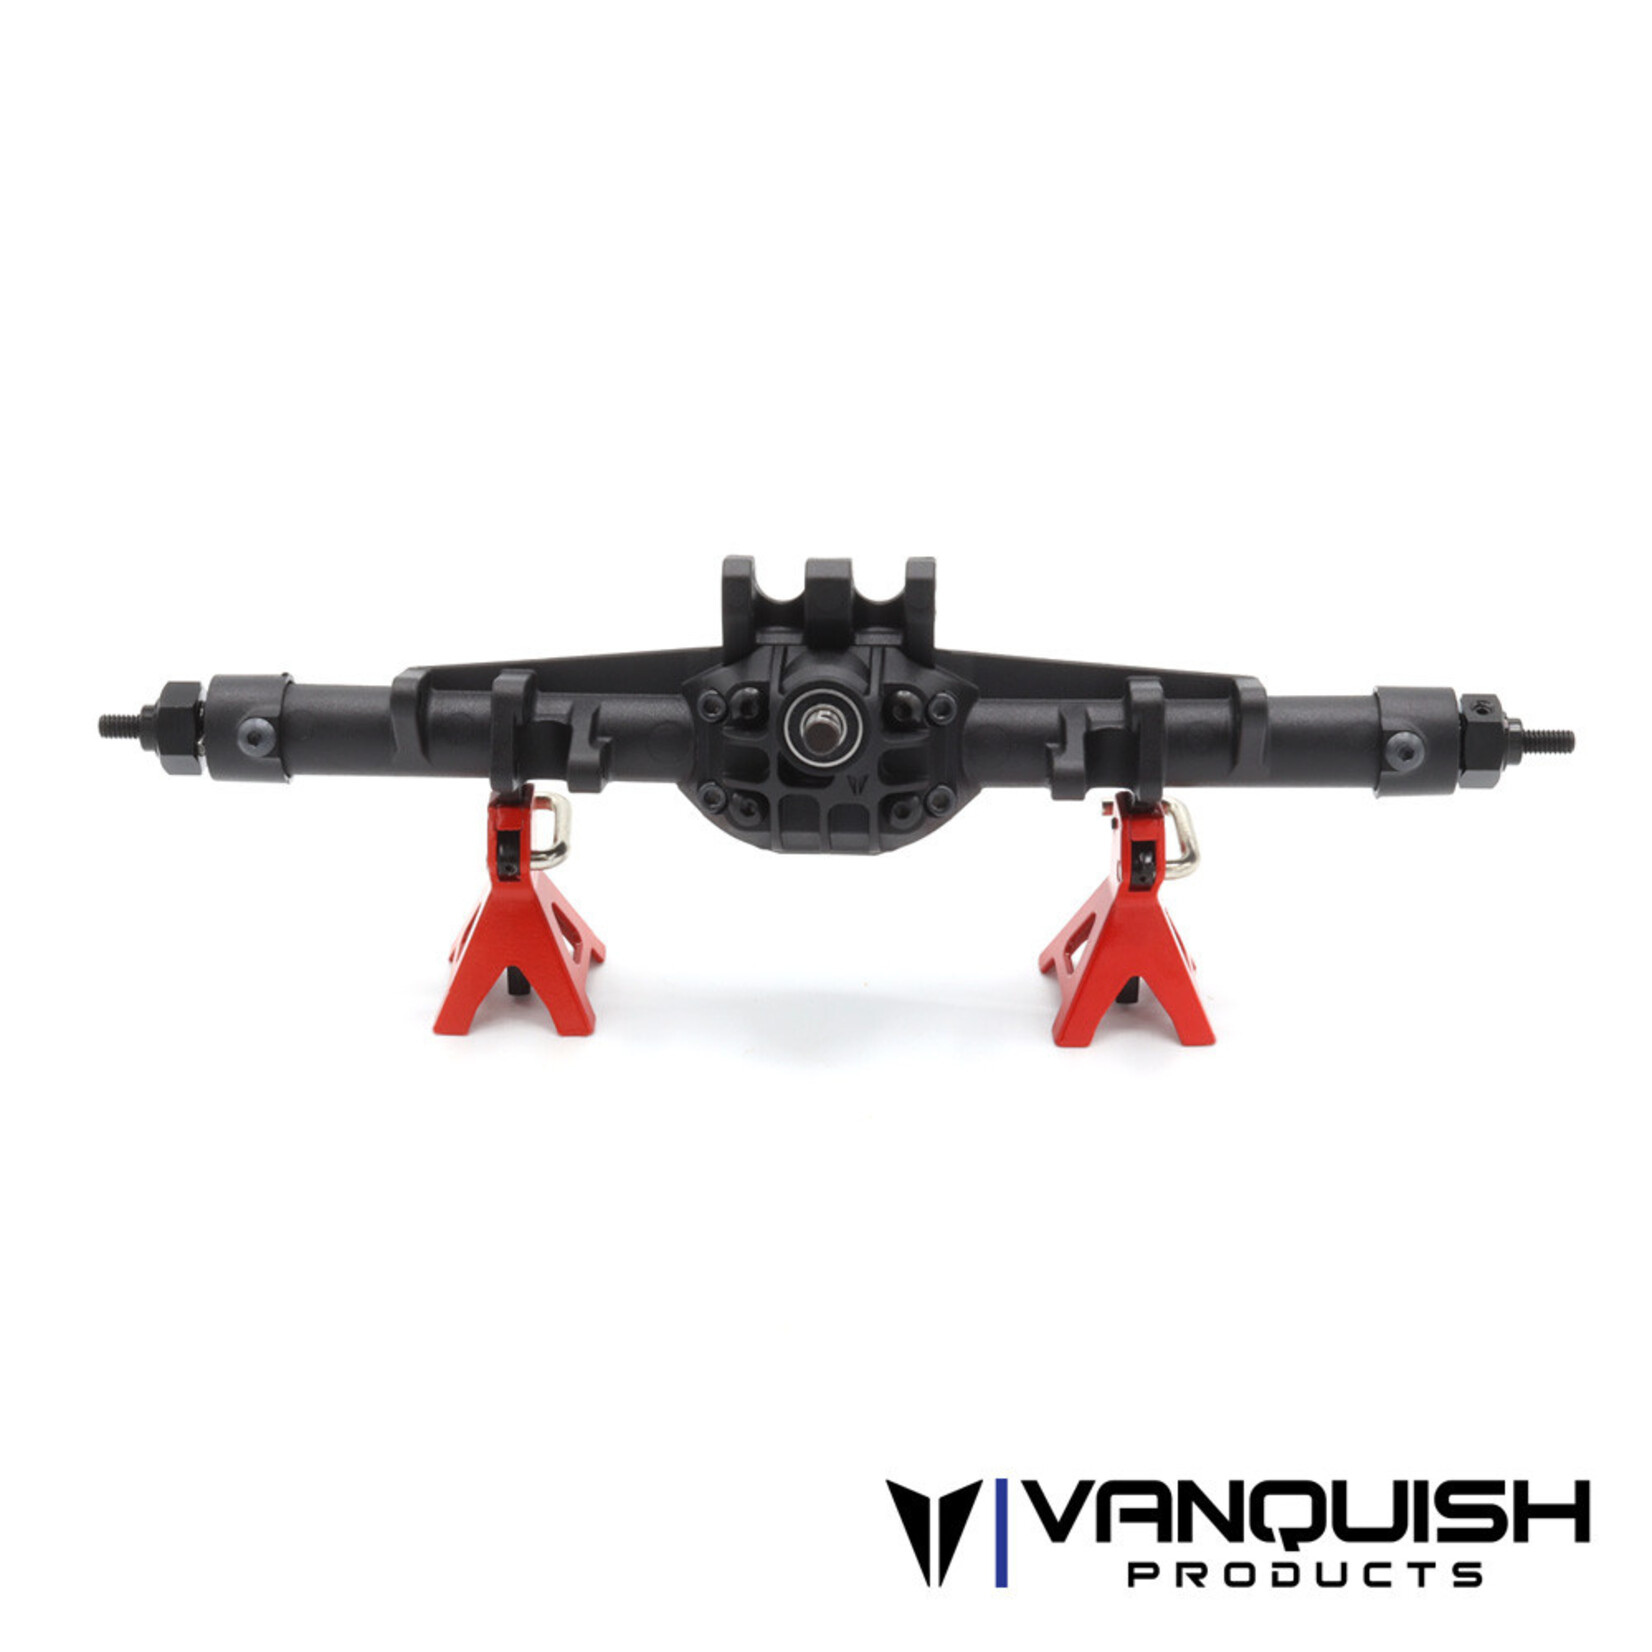 Vanquish Products Vanquish Products F10 Straight Rear Axle Set